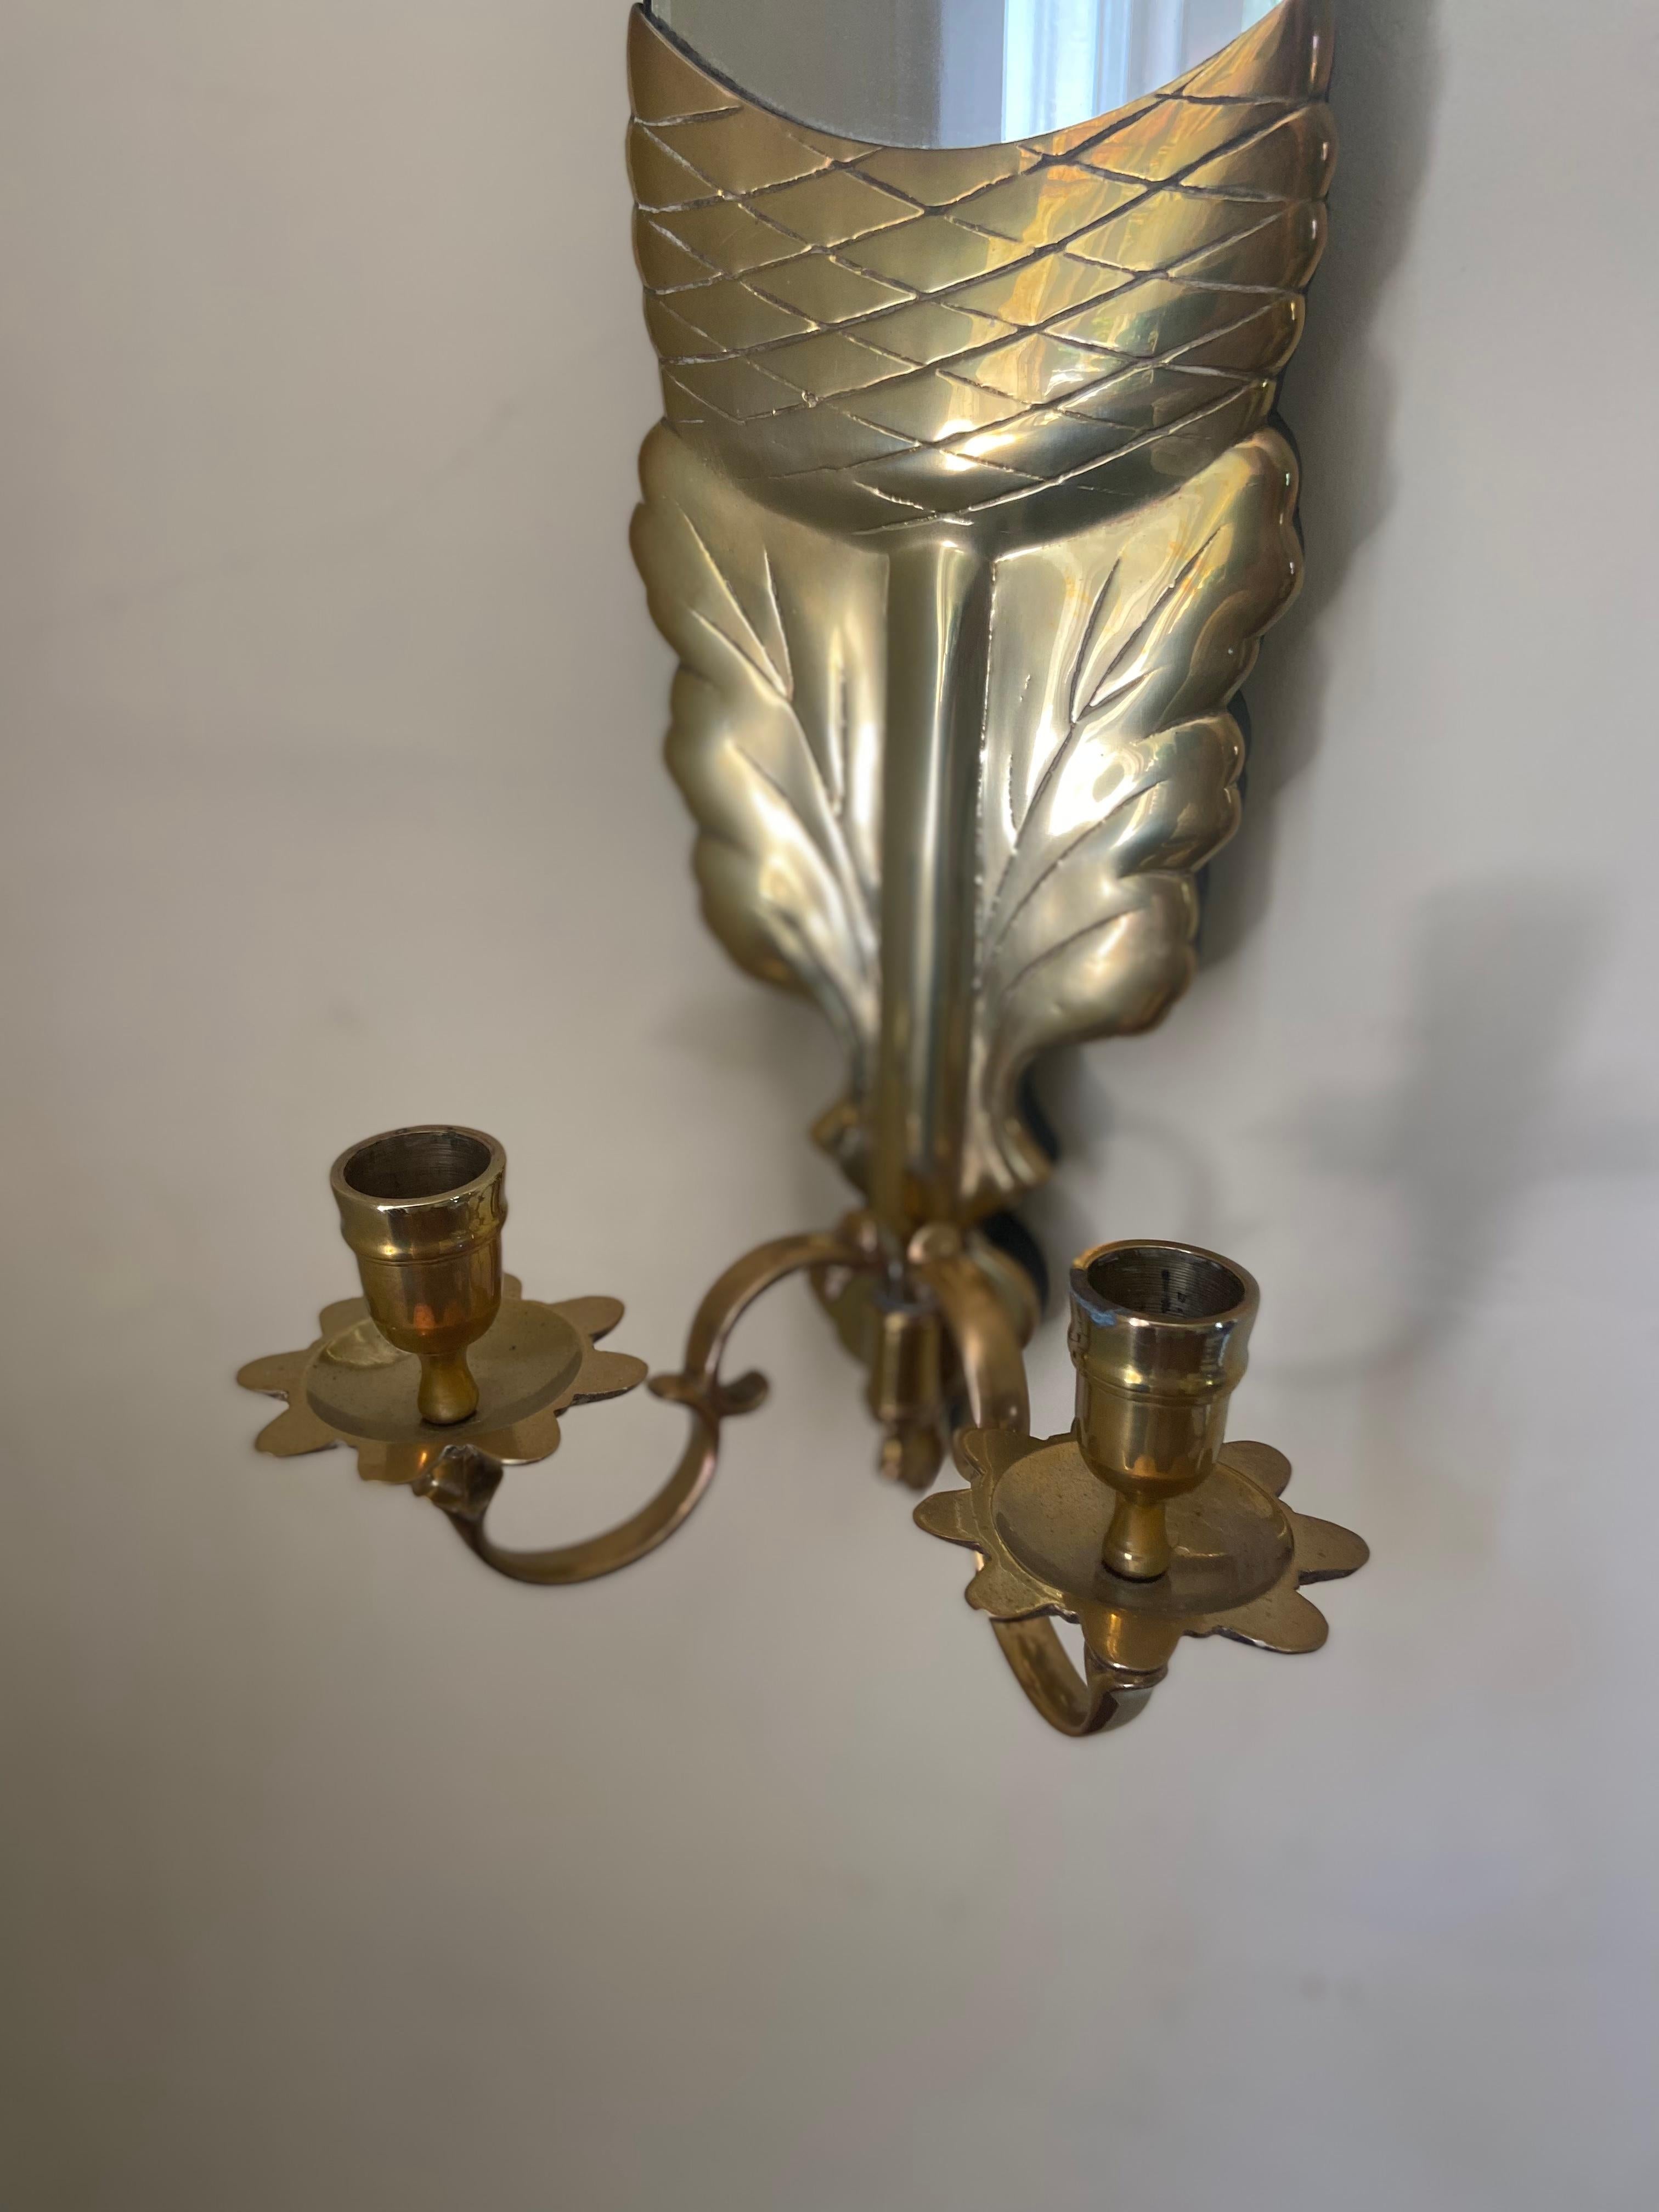 A pair of charming vintage brass and mirrored sconces in the form of a stylized acorn and oak leaf with 2 scrolled candlestick arms by Chapman. 